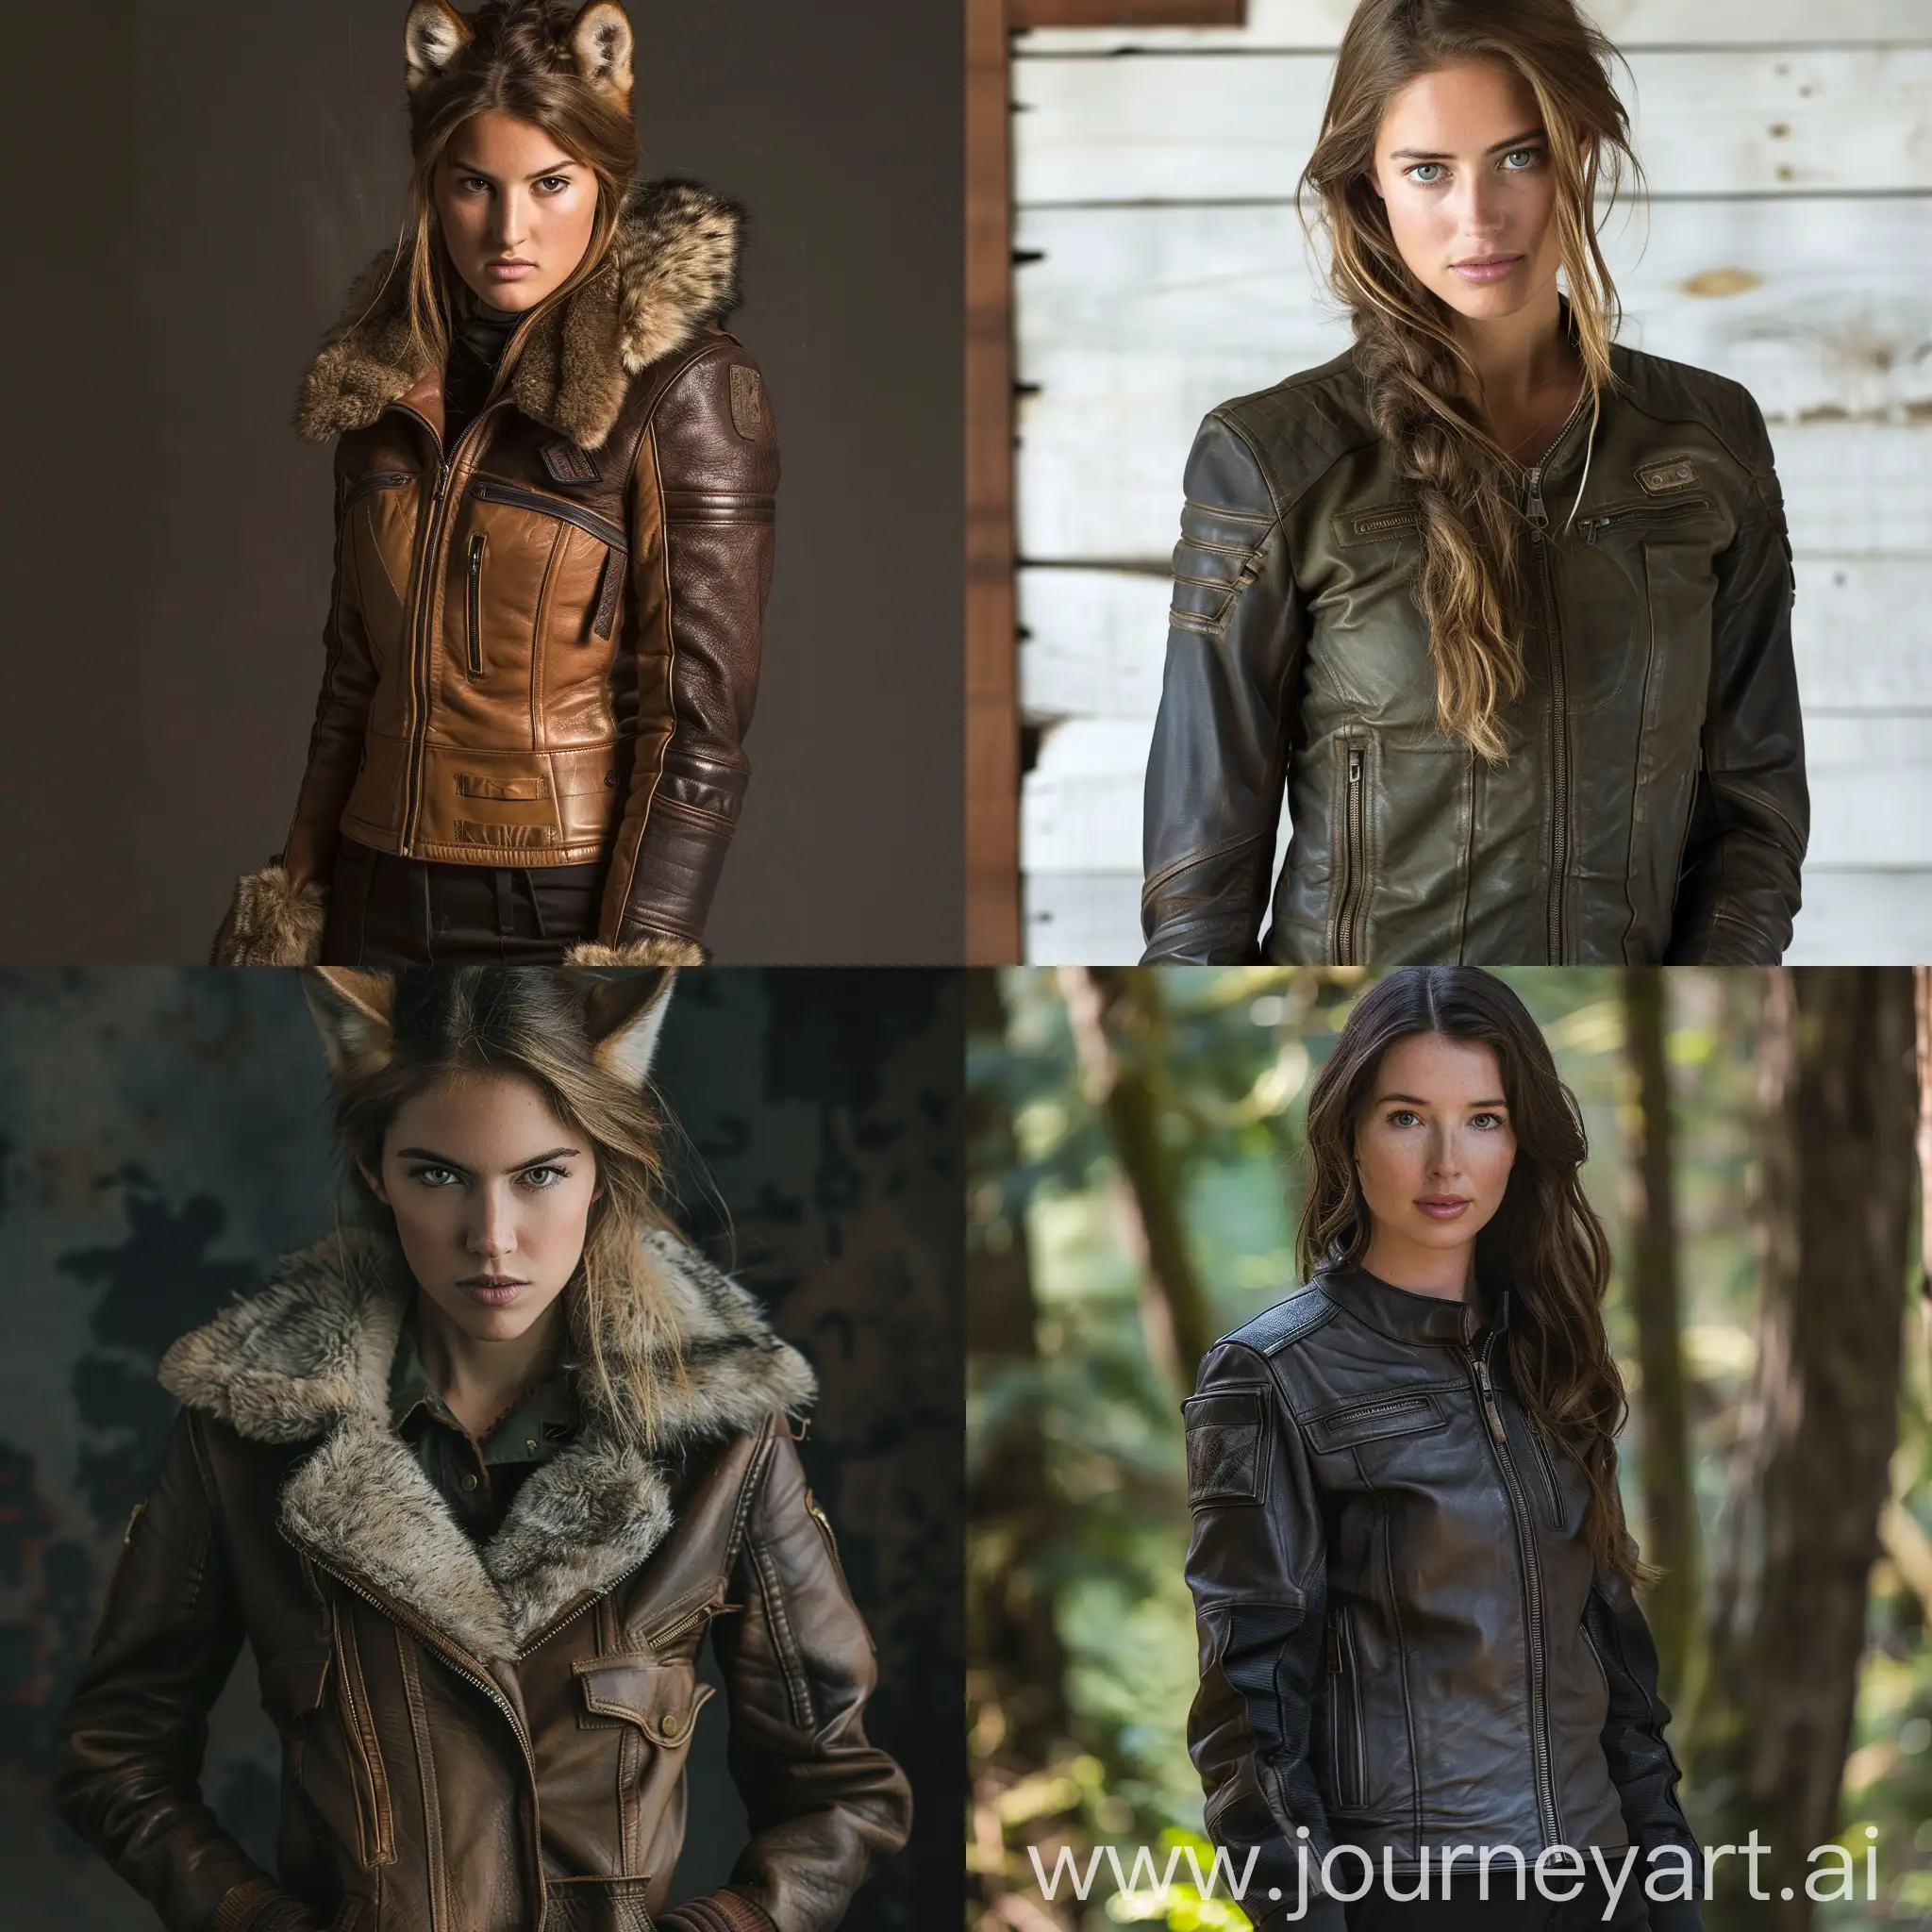 Lone-Woman-Divergent-in-Leather-Pilot-Jacket-with-Werewolf-Encounter